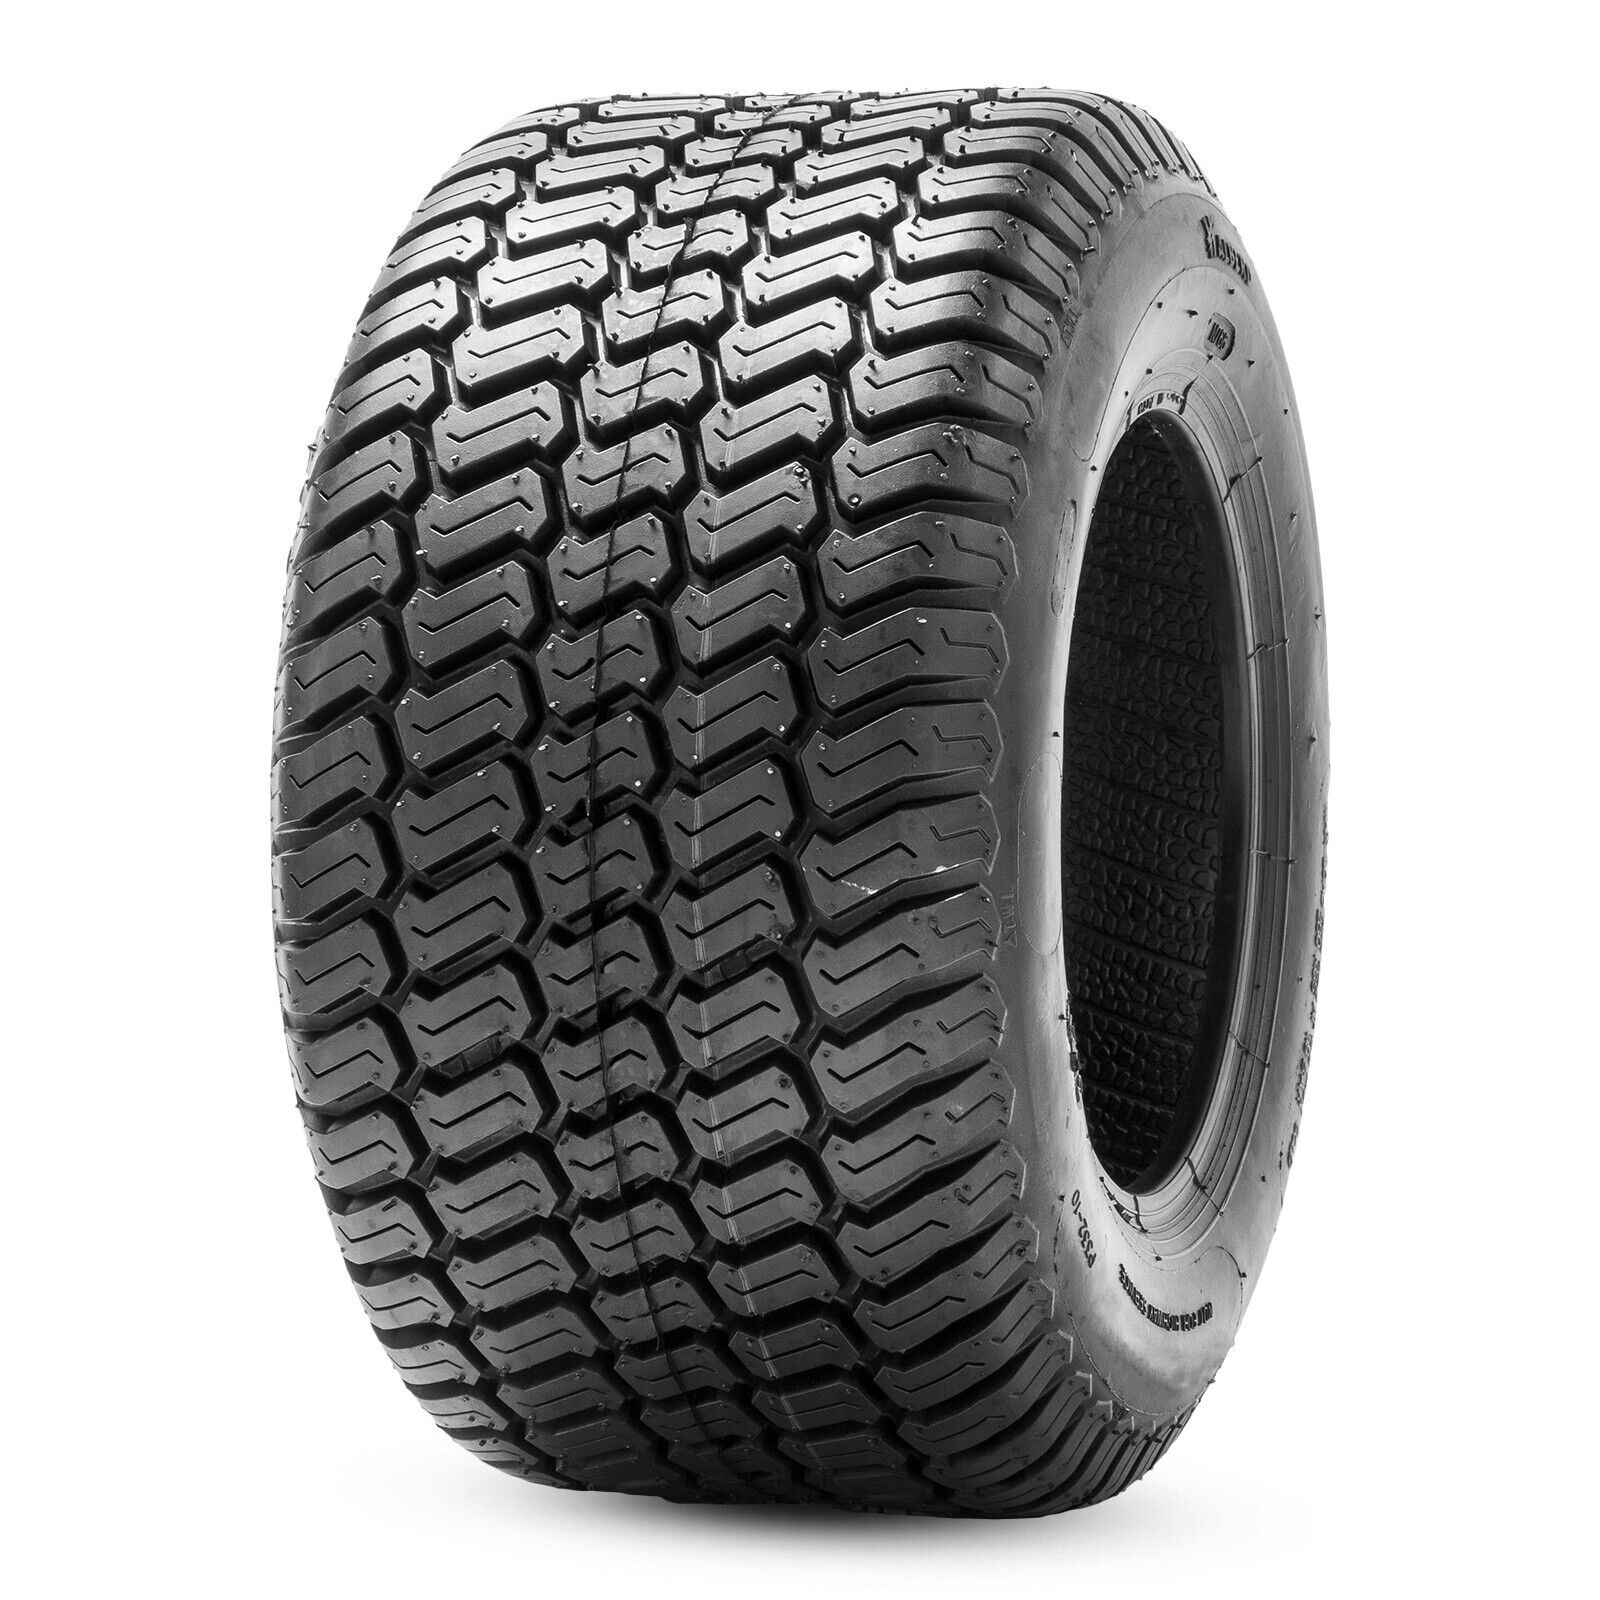 24x12-12 Lawn Mower Tire 4Ply 24x12x12 Turf Tyre 24x12.00-12 Tractor Tubeless